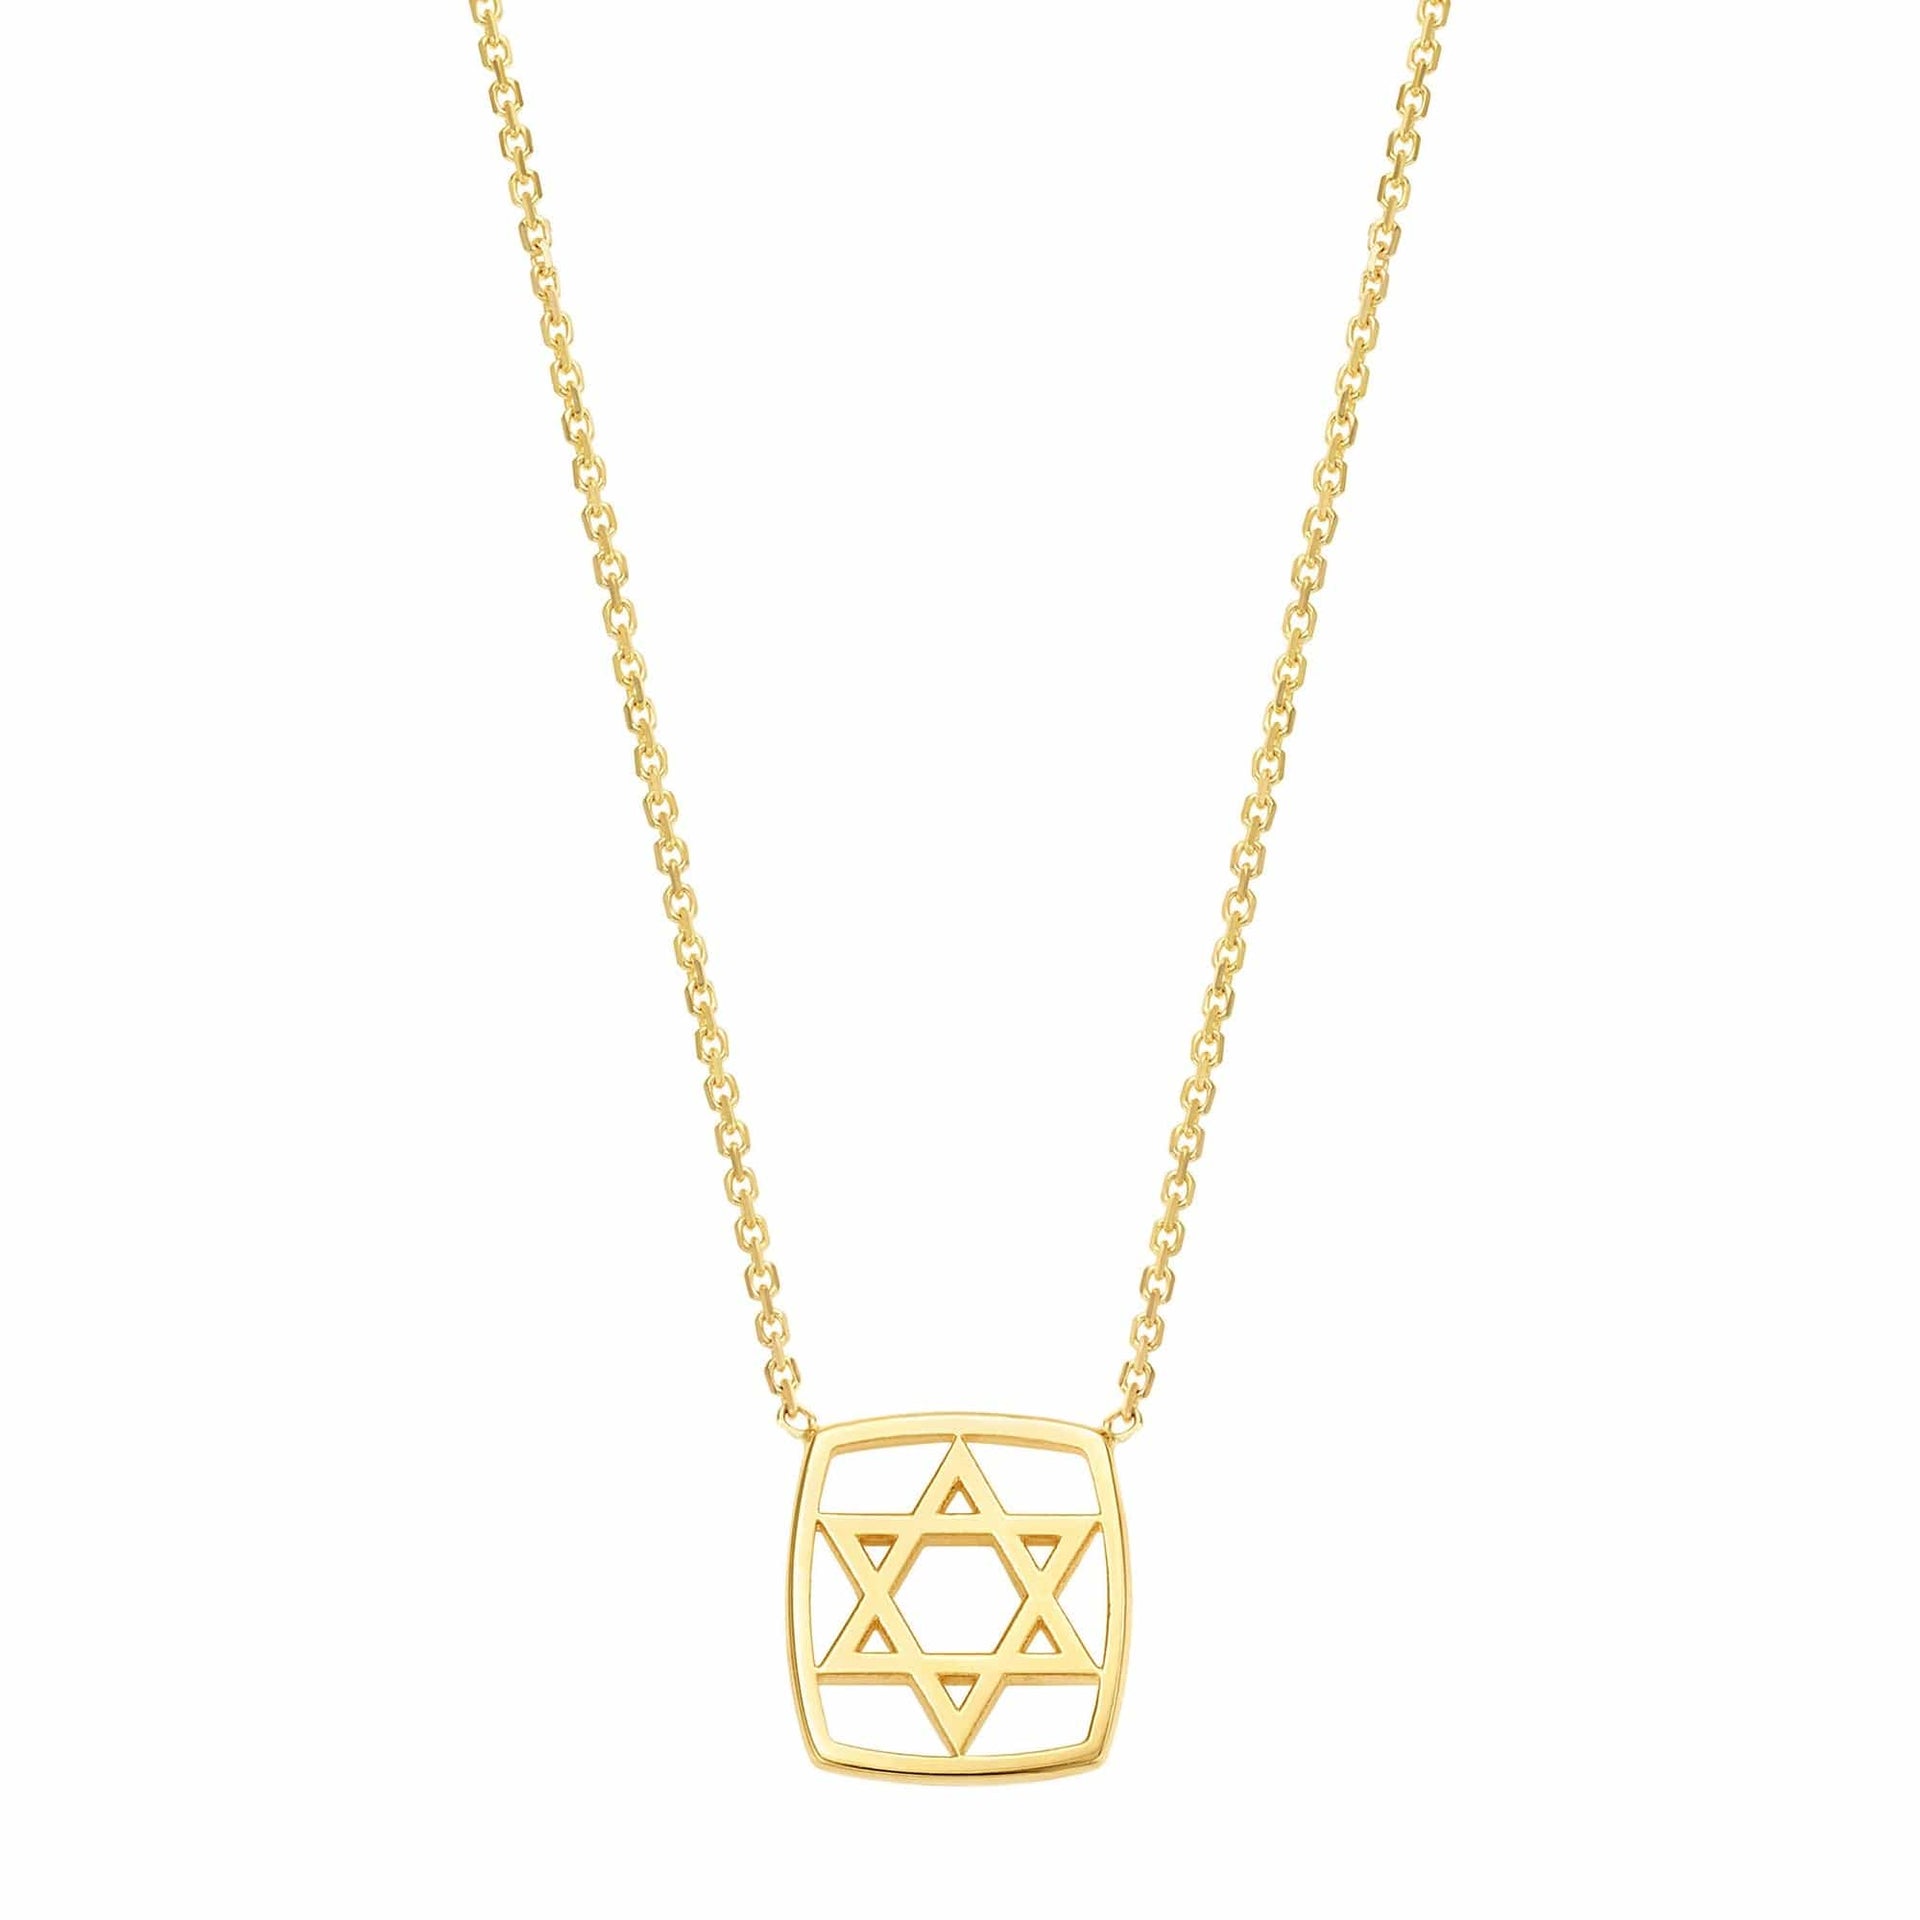 LeahJessicaJewelry Necklaces The Ahava Magen David Necklace by Leah Jessica